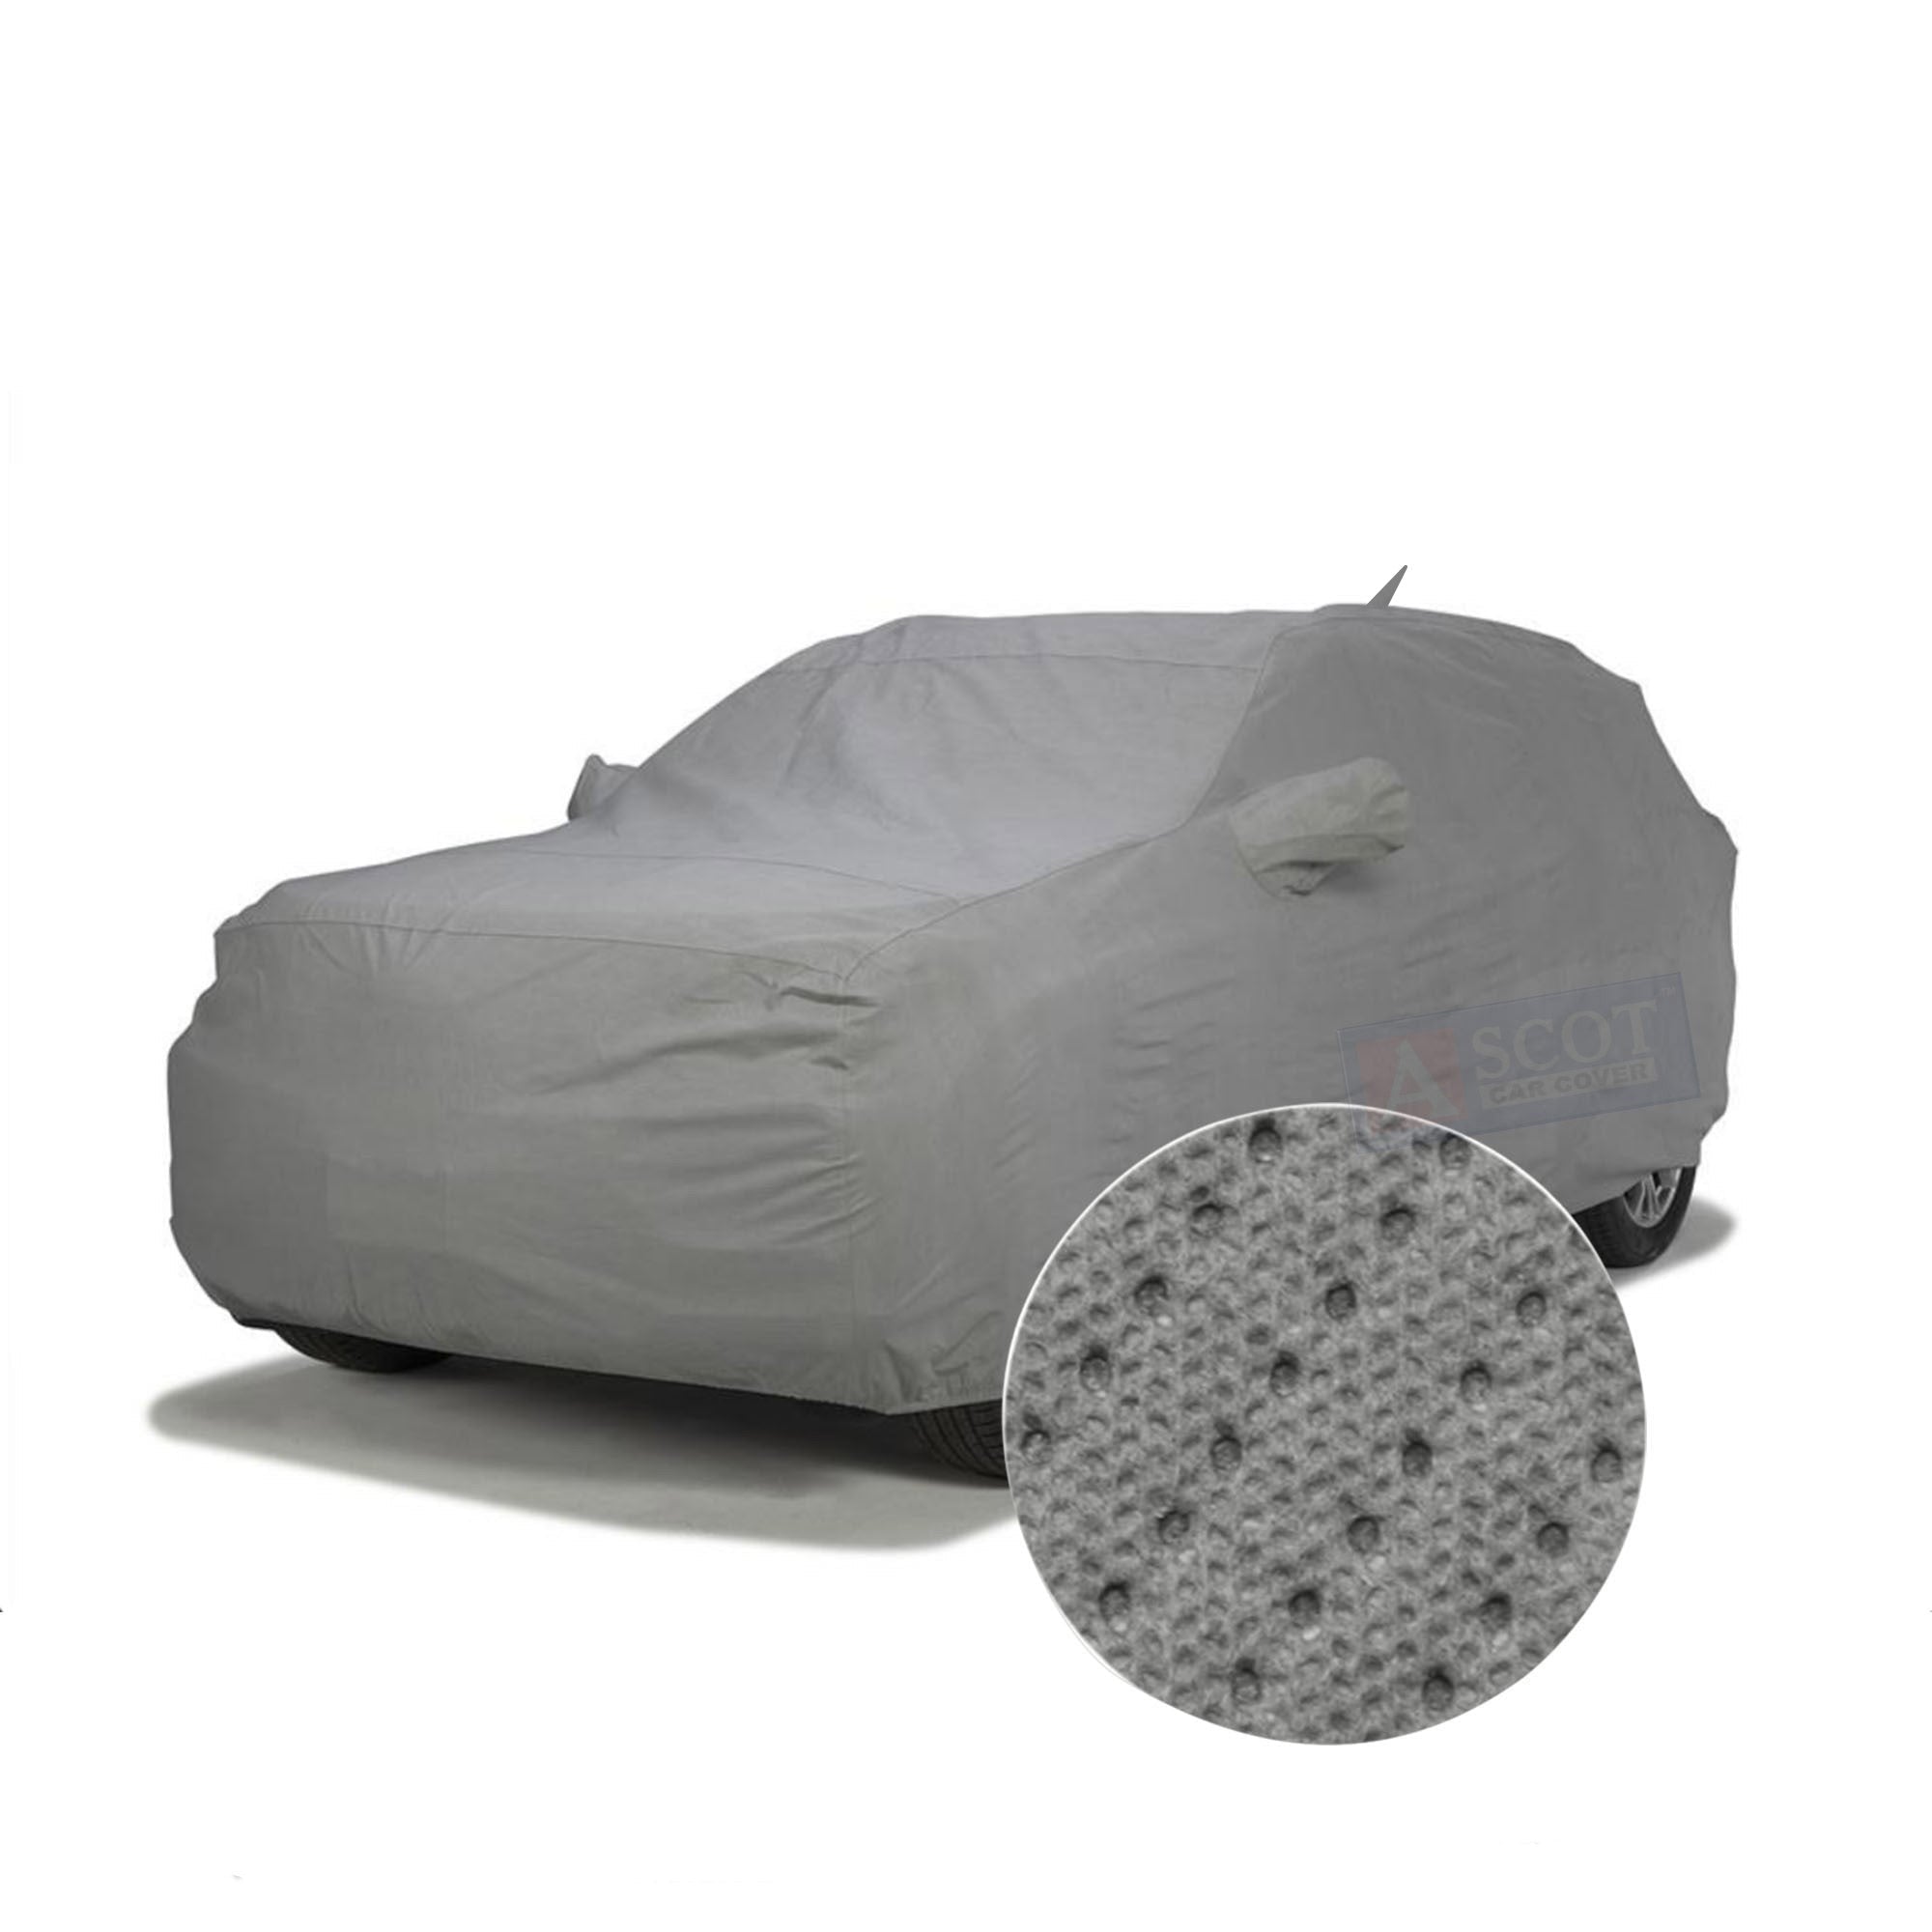 KIA Stonic Top Cover - Car Parking Top Cover - Water Proof- Dust